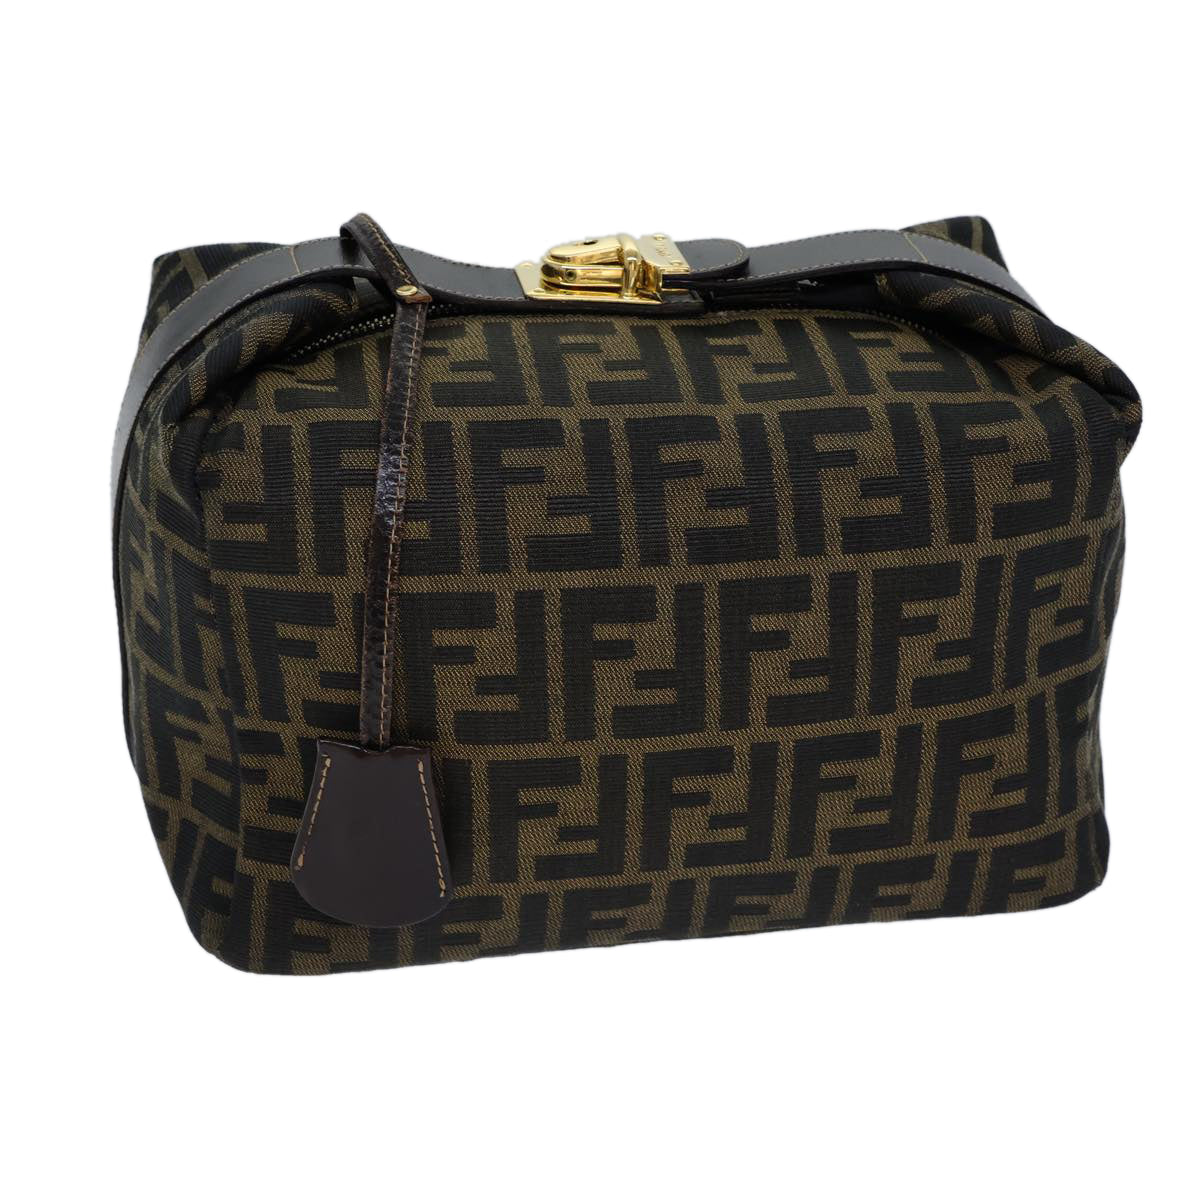 FENDI Zucca Canvas Vanity Cosmetic Pouch Brown Black Auth 72408